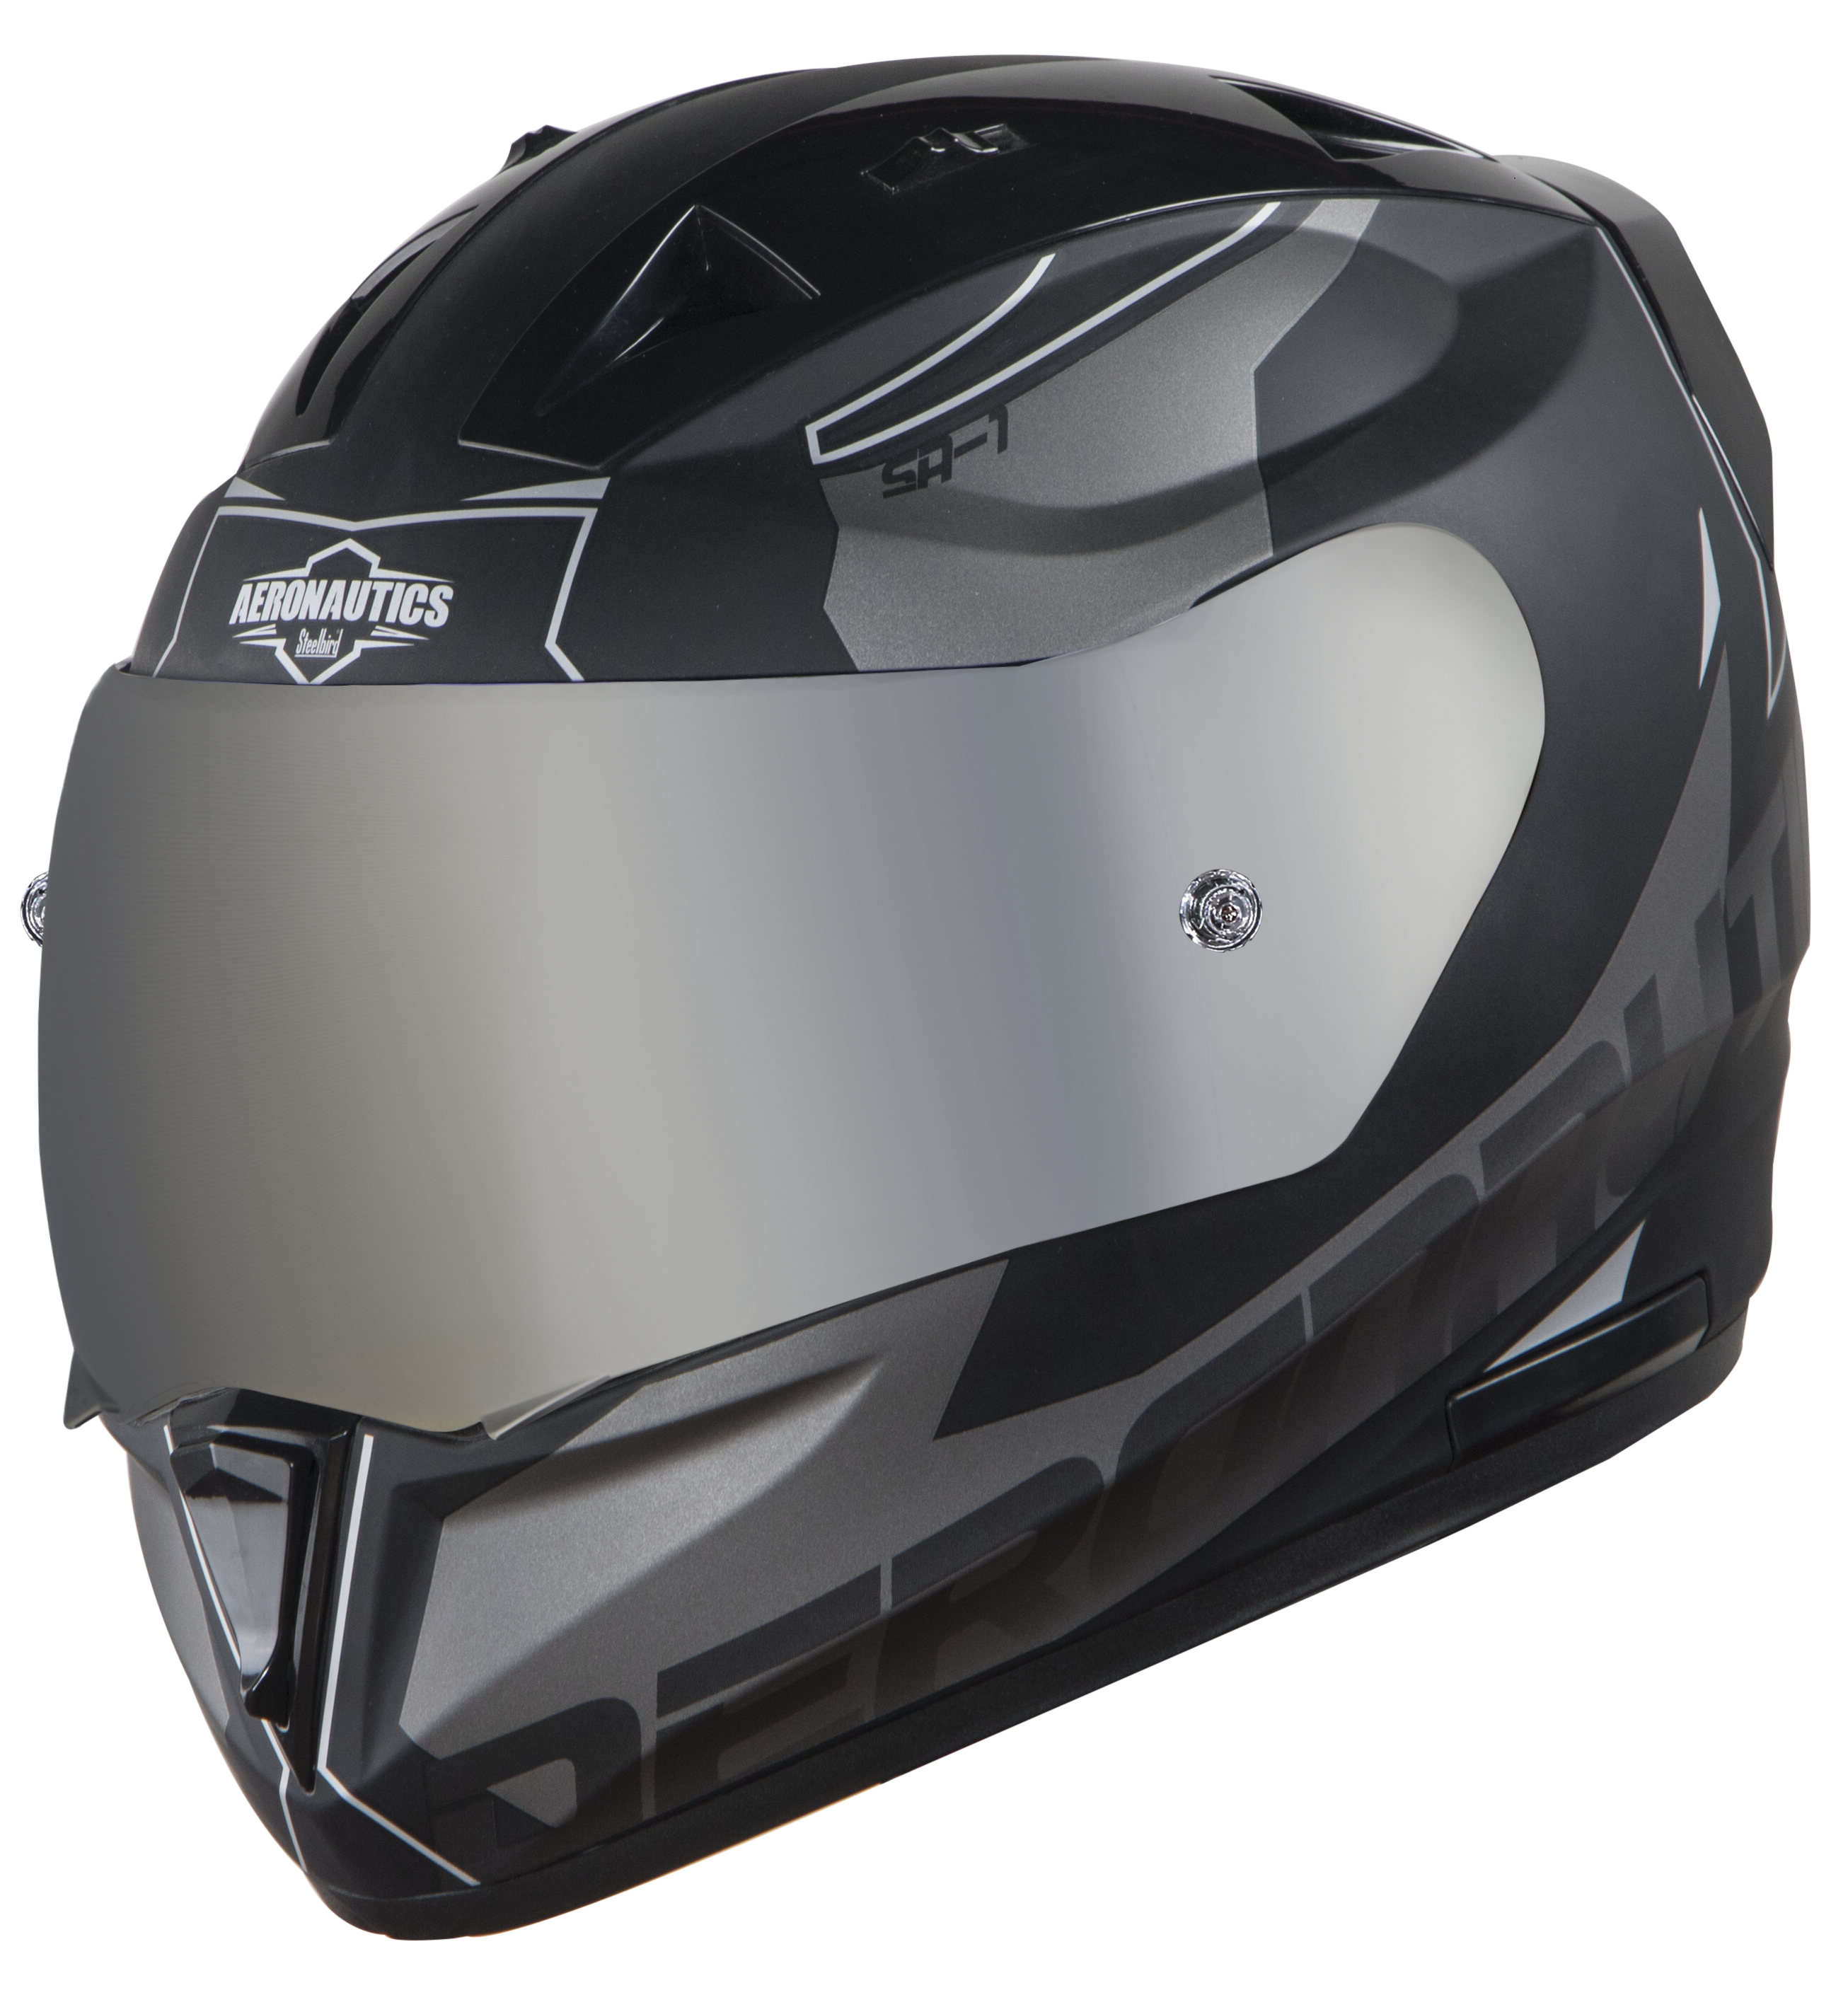 SA-1 RTW Mat Black/White With Anti-Fog Shield Silver Chrome Visor (Fitted With Clear Visor Extra Silver Chrome Anti-Fog Shield Visor Free)